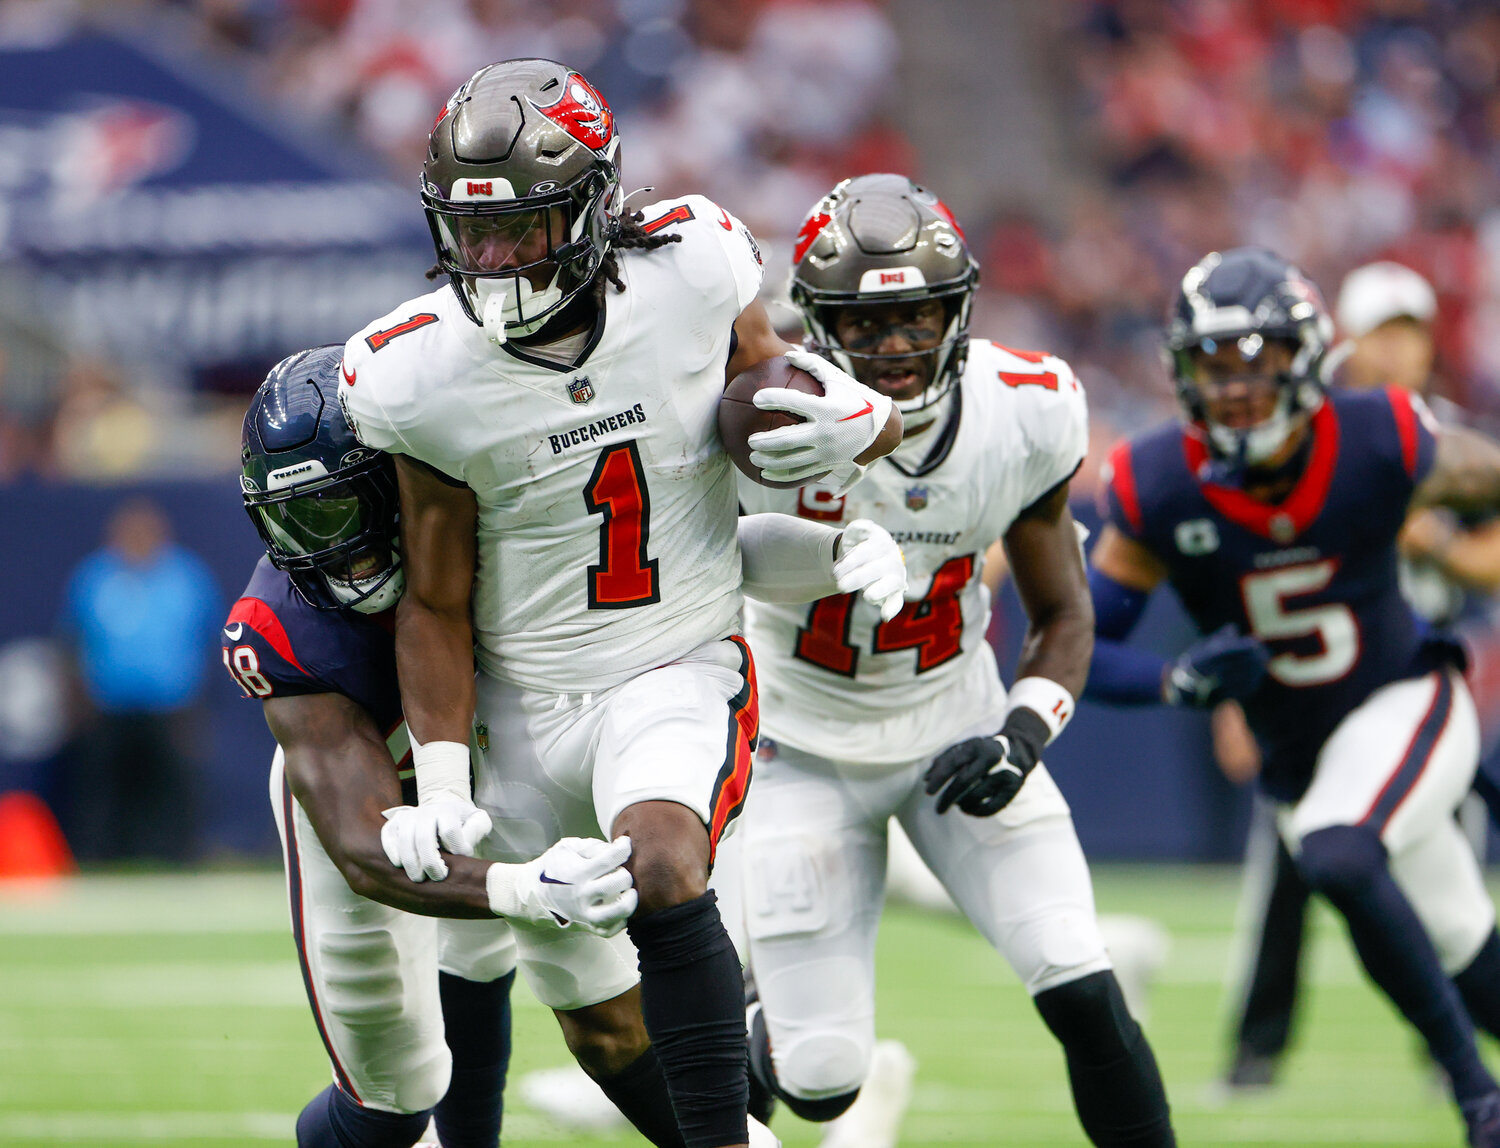 Buccaneers running back Rachaad White (1) is tackled on a carry during an NFL game between the Houston Texans and the Tampa Bay Buccaneers on November 5, 2023 in Houston.